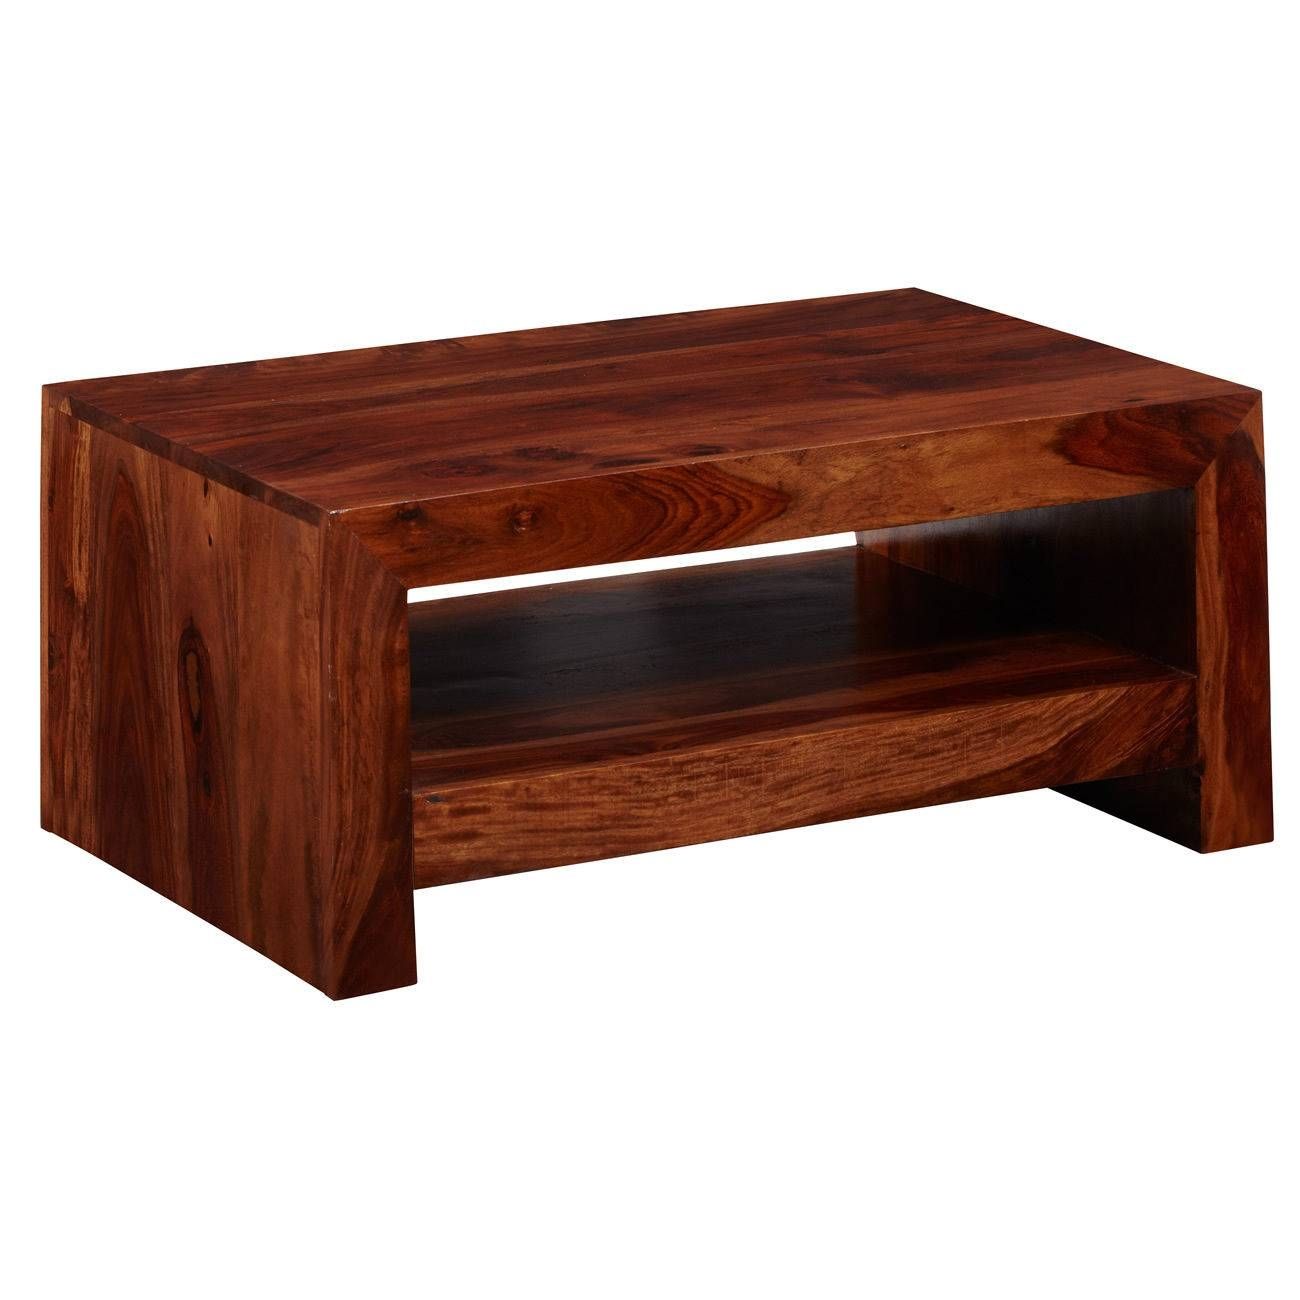 Wooden Coffee Tables | Ebay With Wooden Coffee Tables (Photo 1 of 15)